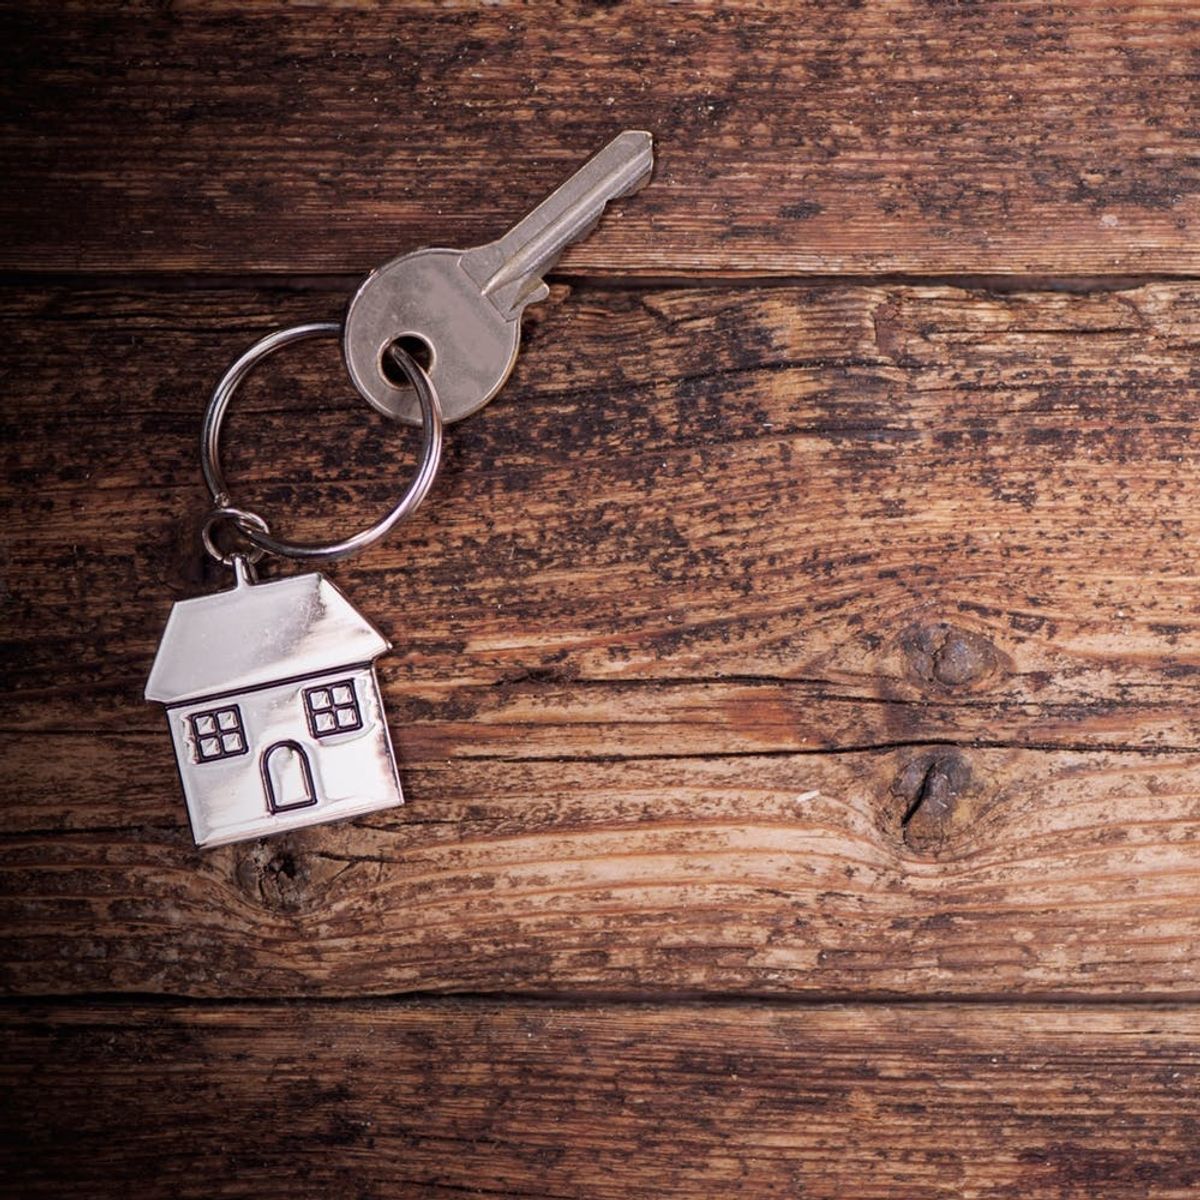 7 Common Myths About Being a Homeowner